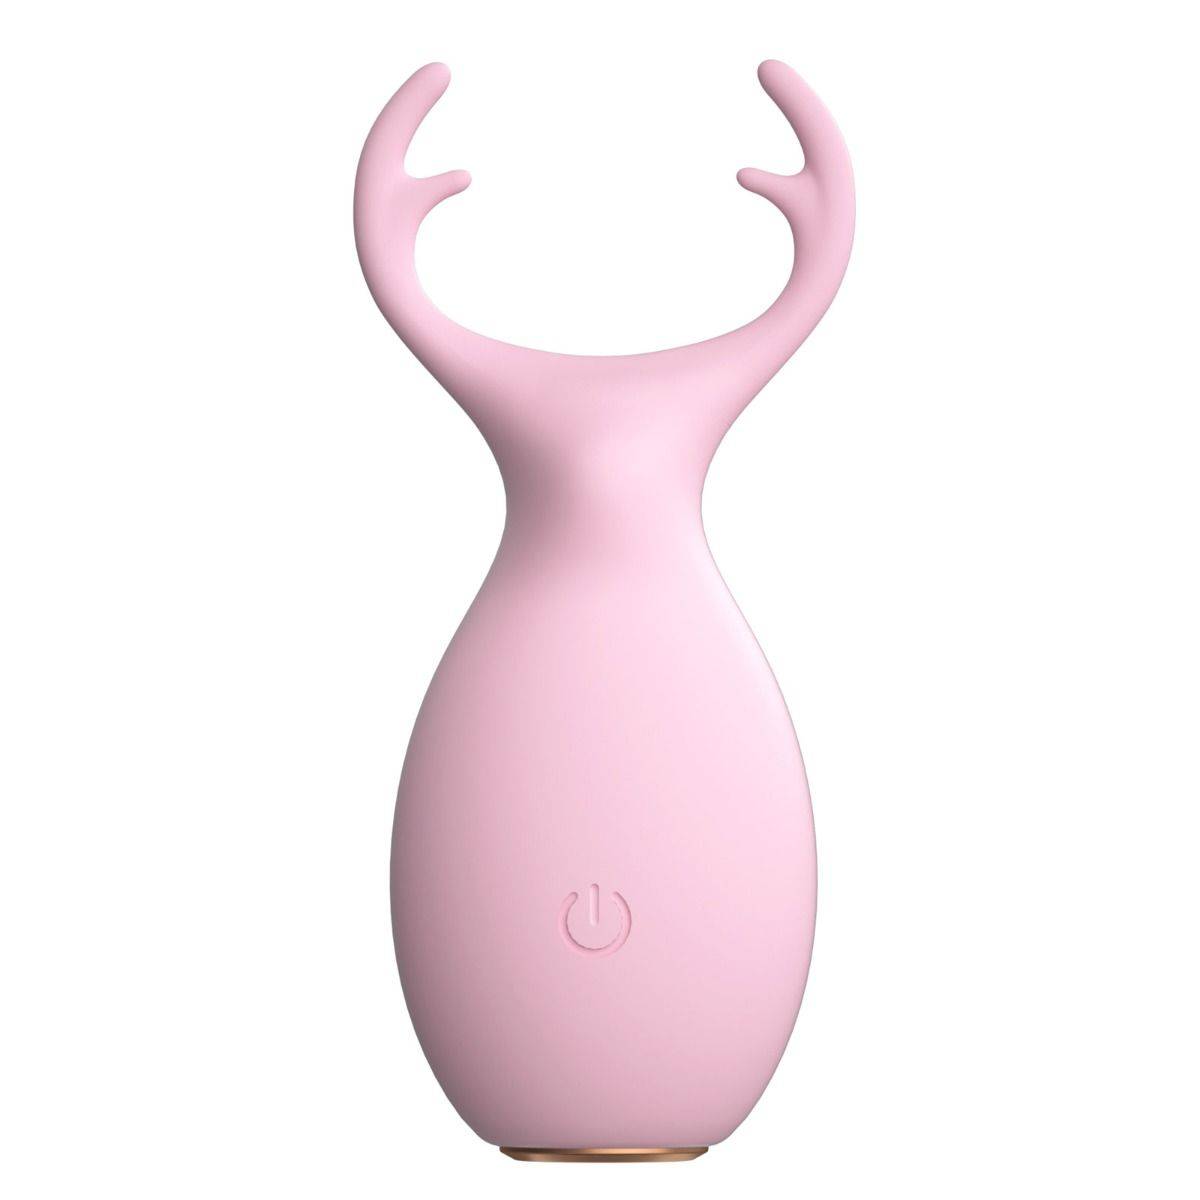 Front Product View - Me You Us Wild Pleasure Antlers Vibrator Pink - Simply Pleasure